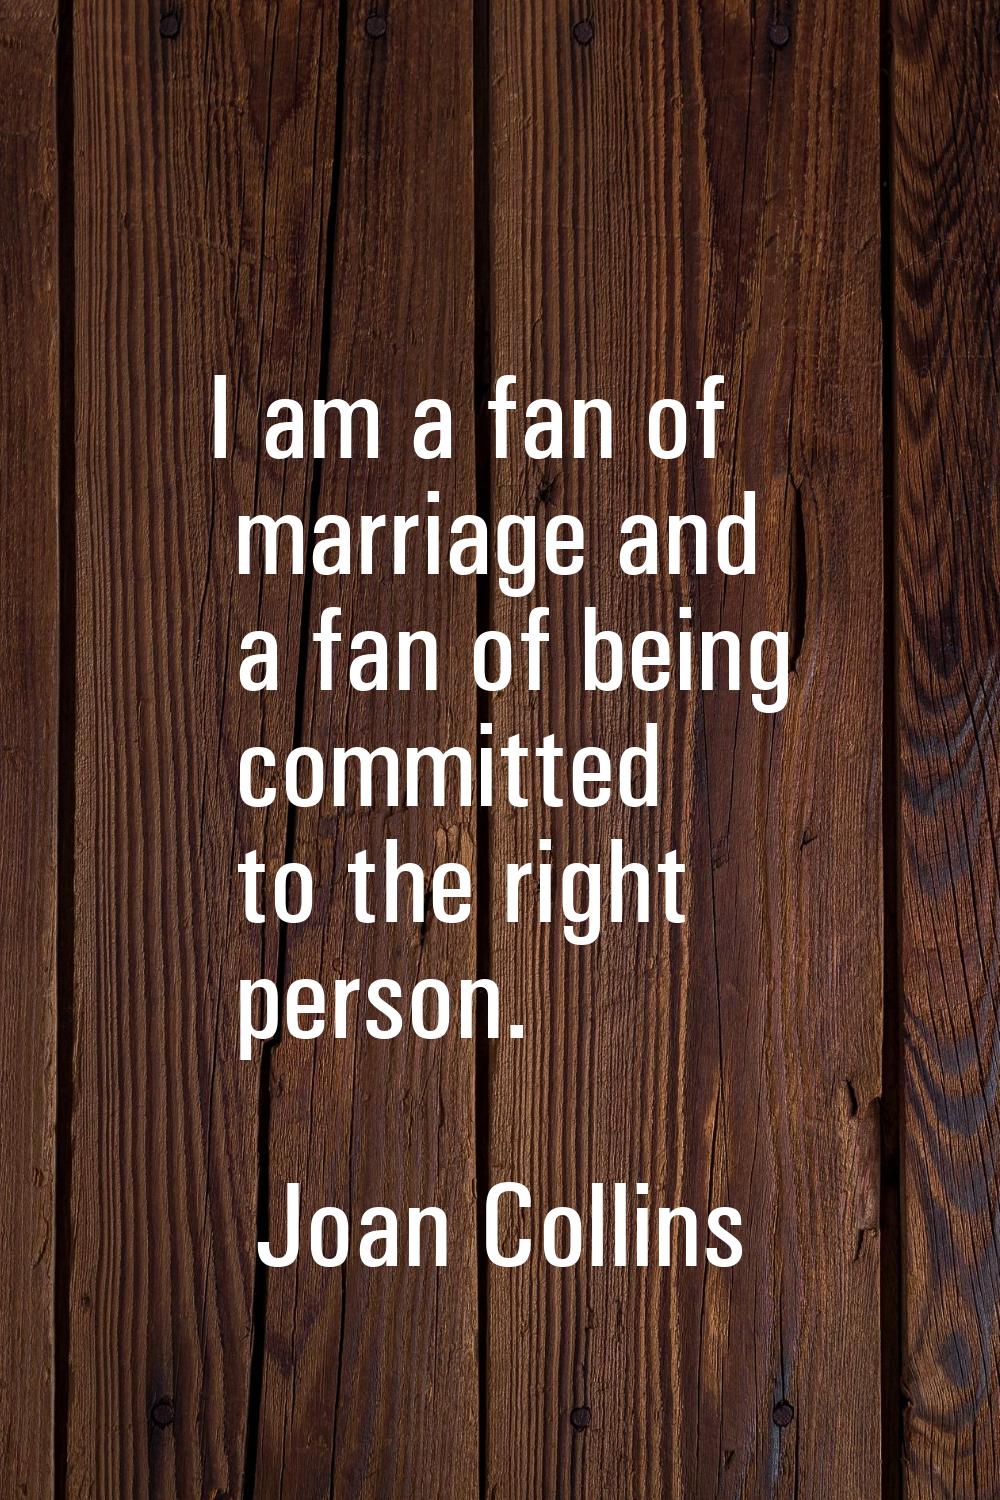 I am a fan of marriage and a fan of being committed to the right person.